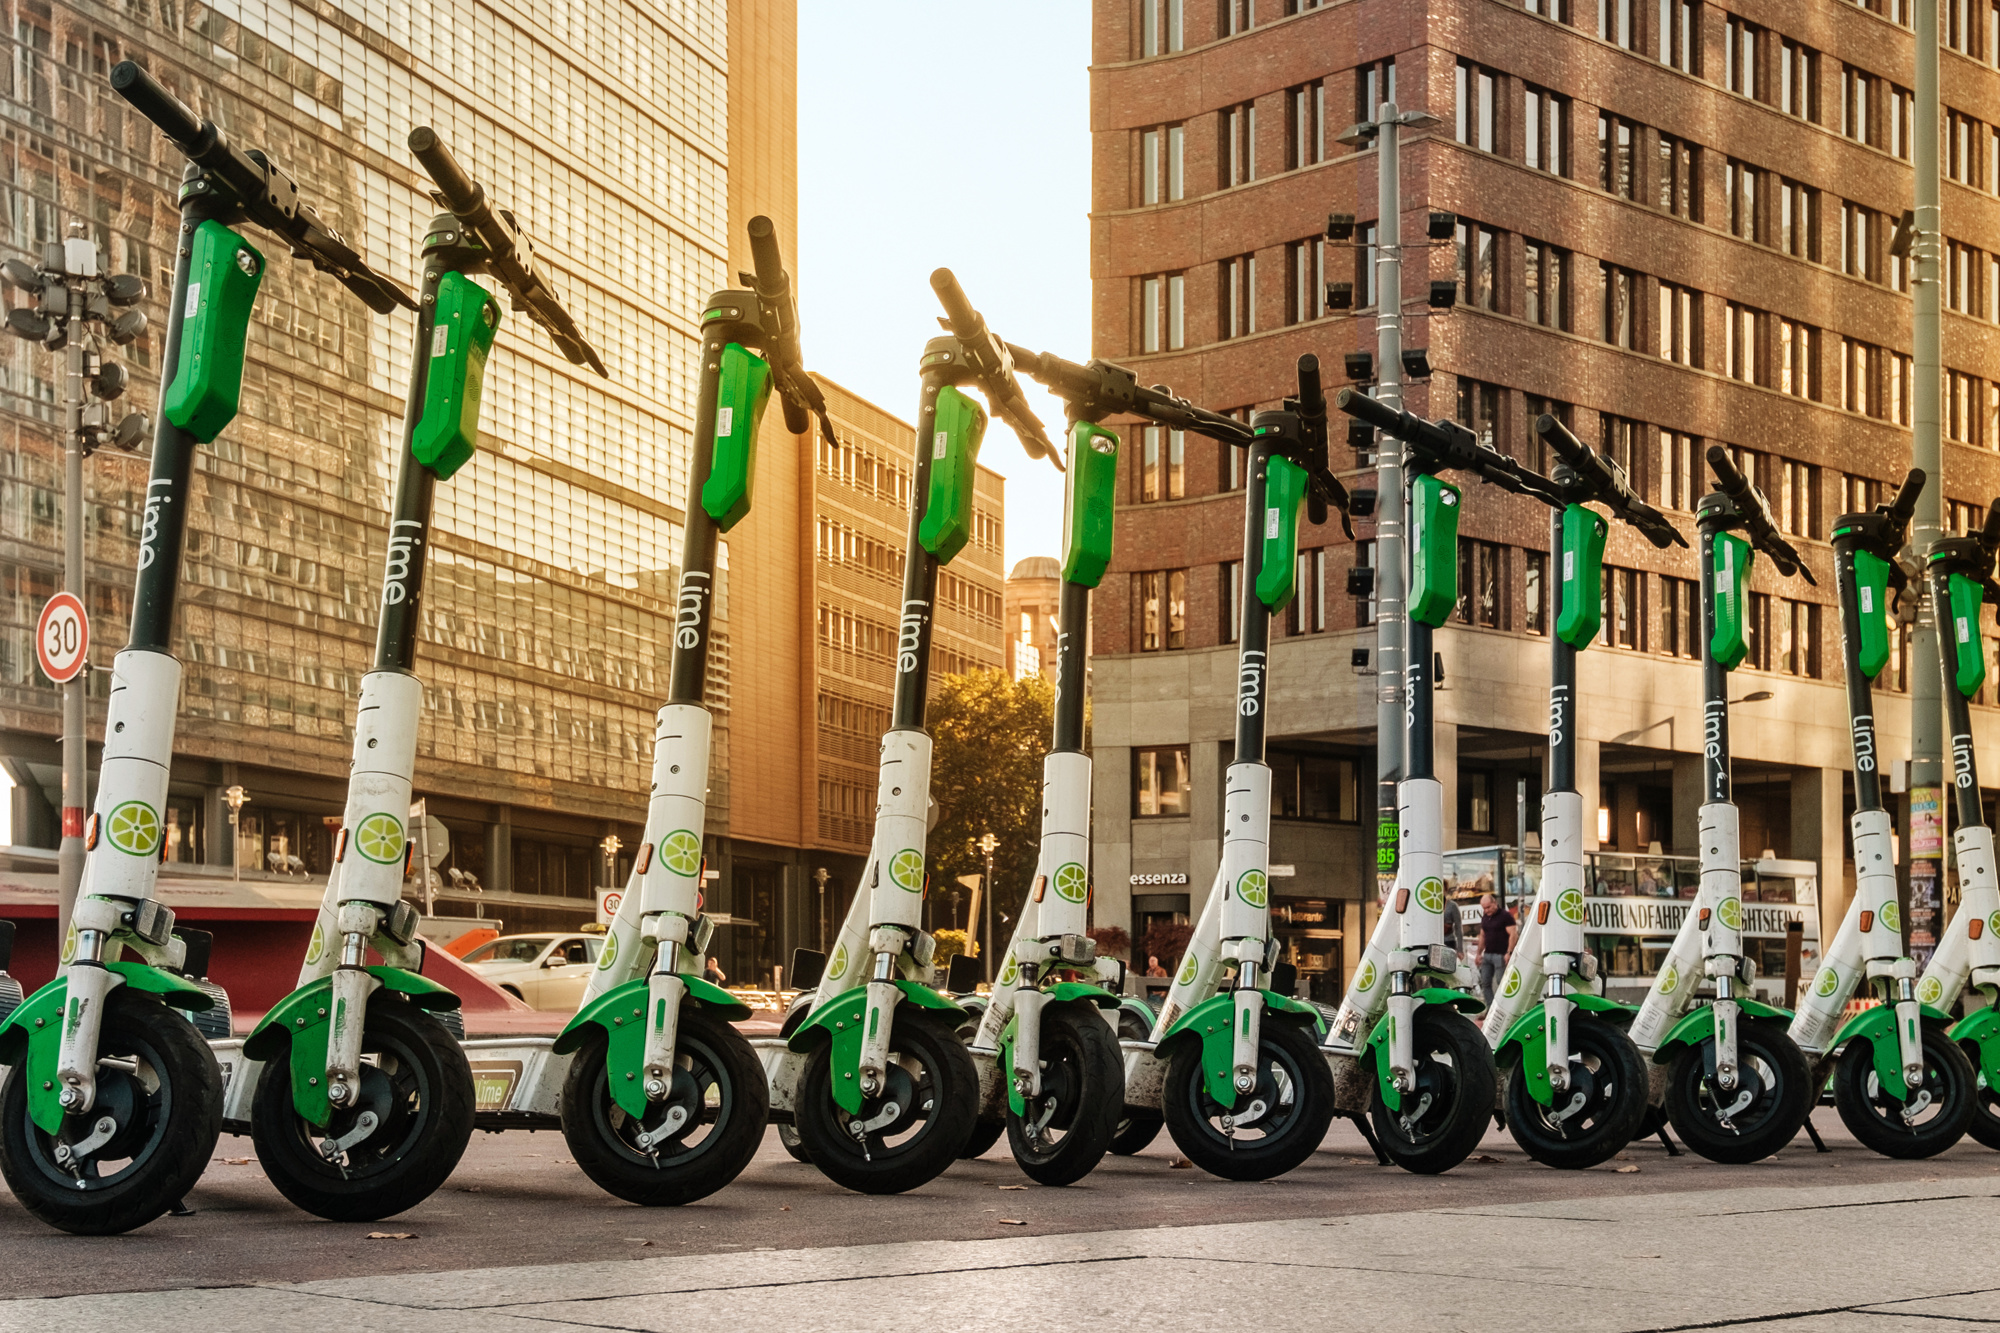 Lime dockless scooters await users.